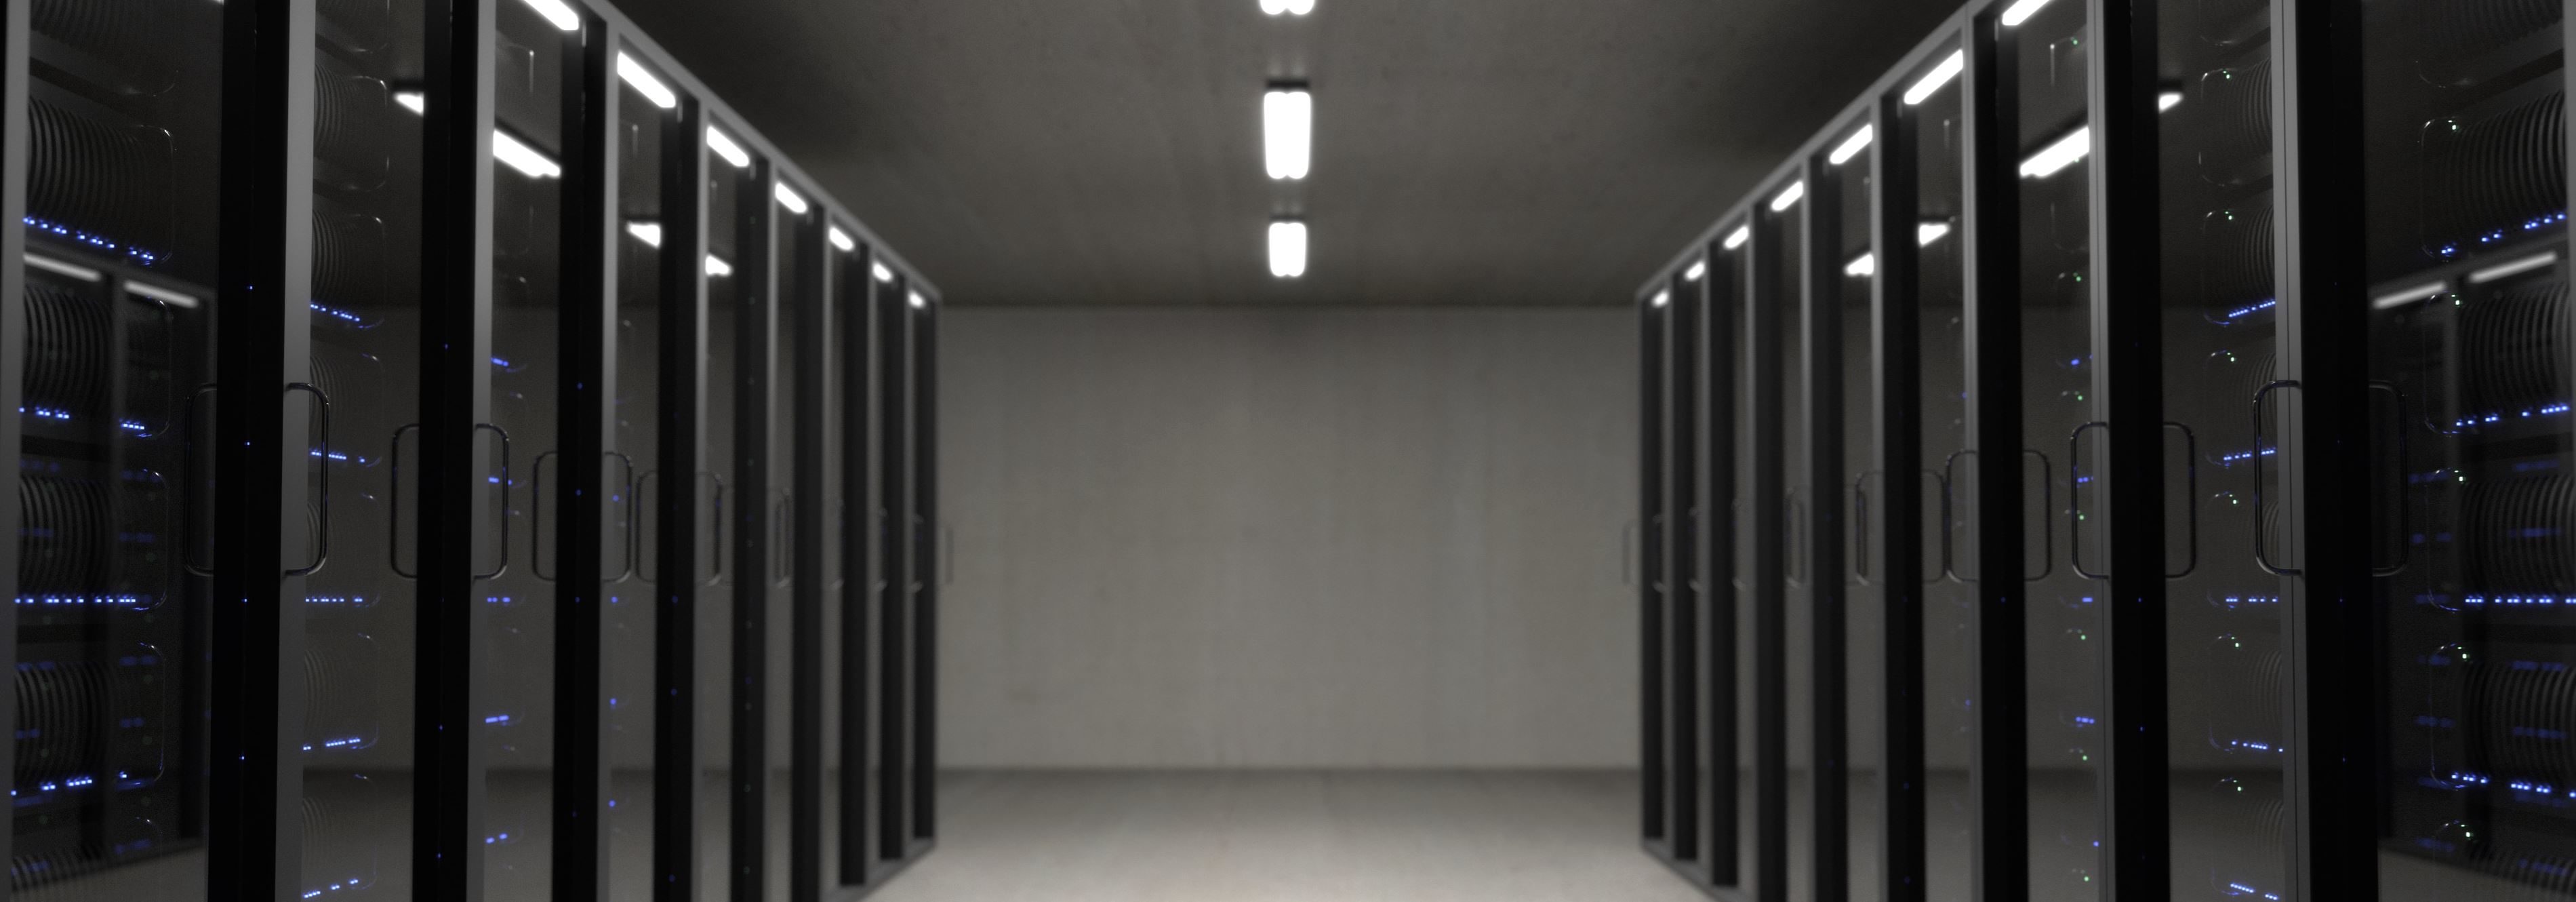 CISOs require infrastructure-agnostic security and visibility to support data center modernization, survey shows